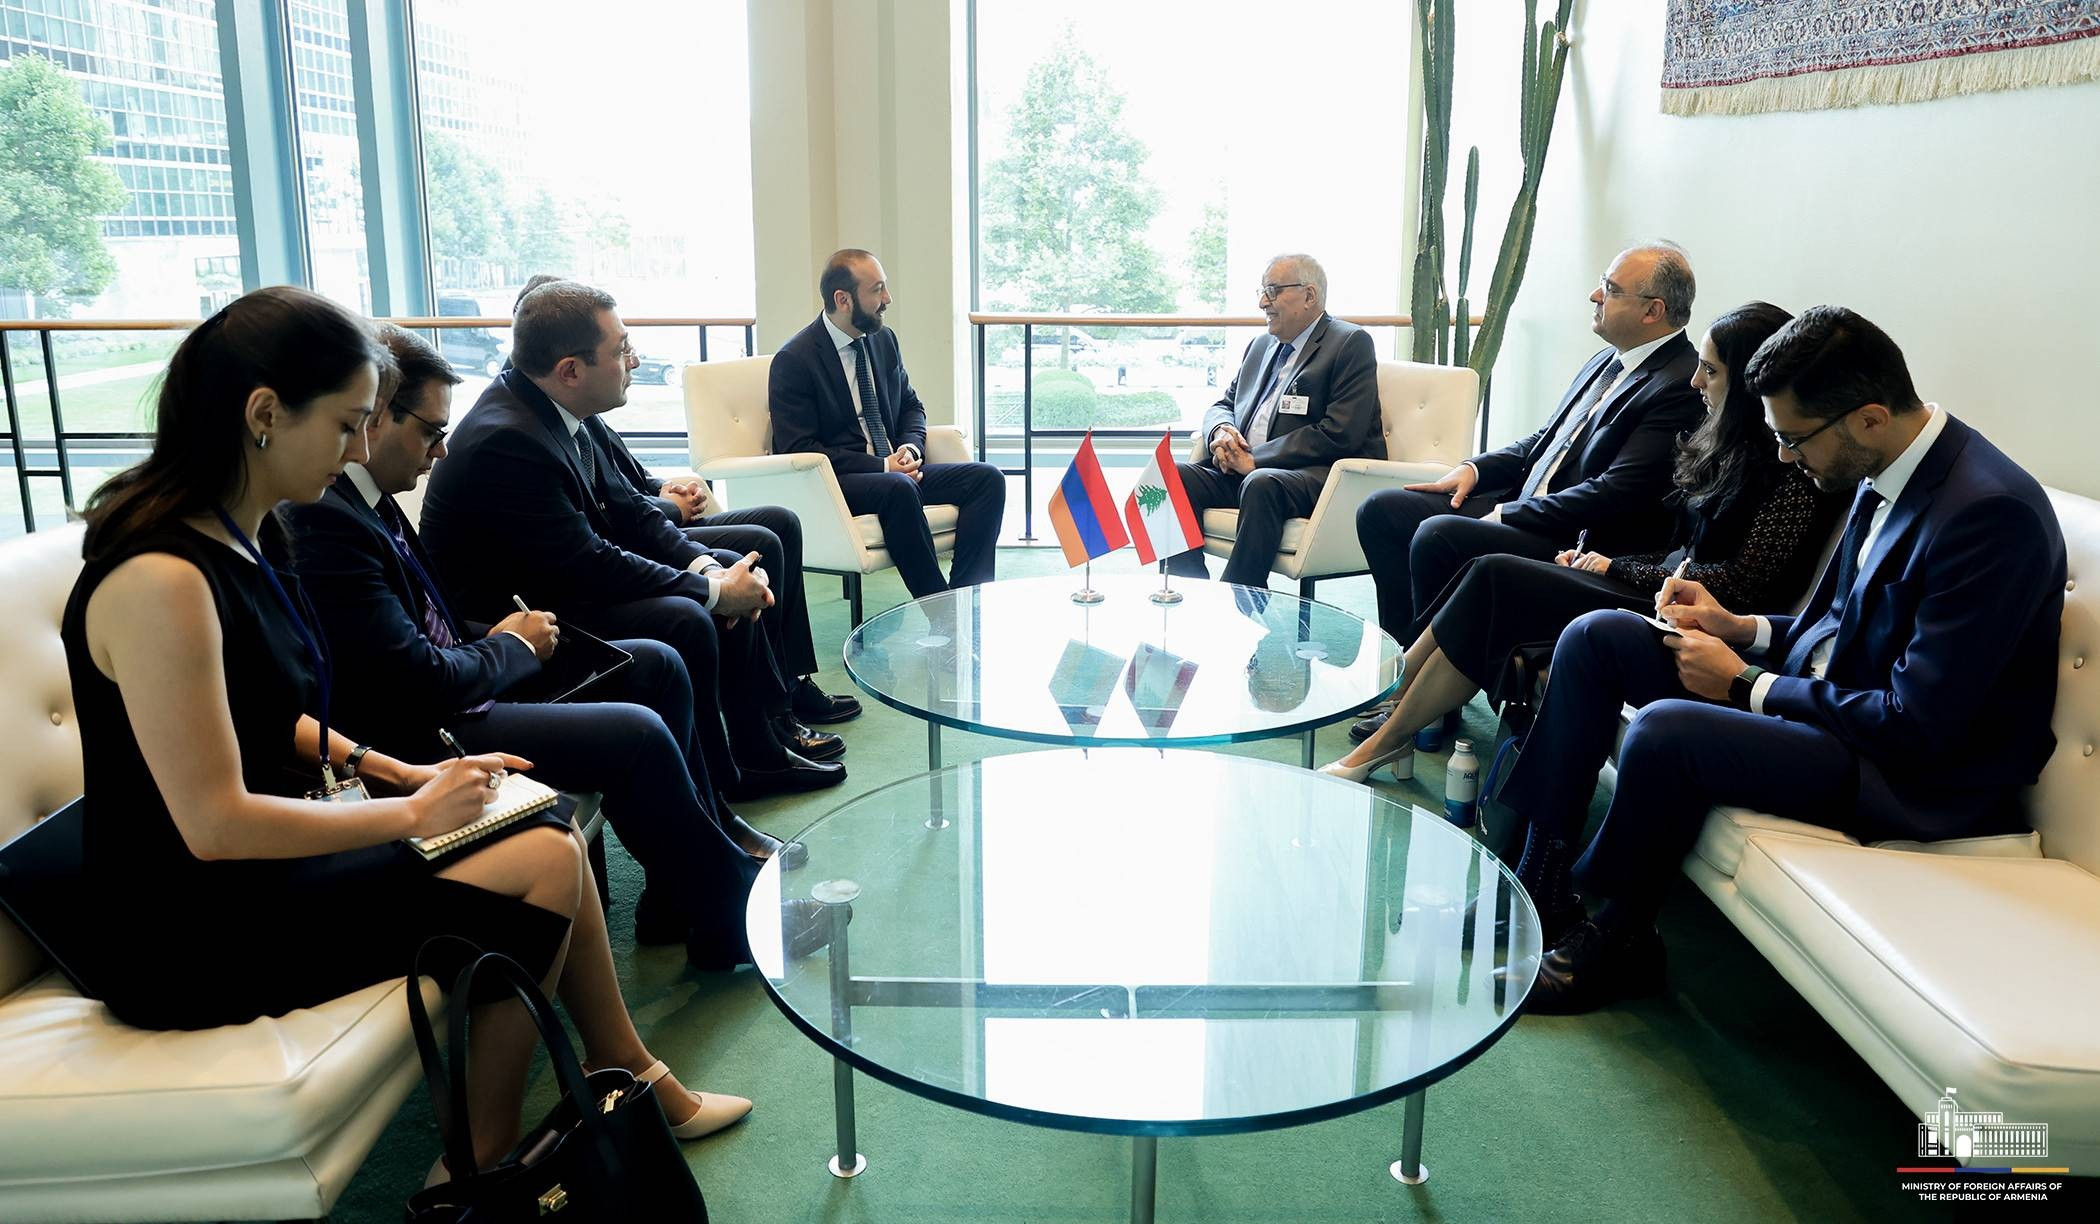 Meeting of Ministers of Foreign Affairs of Armenia and Lebanon